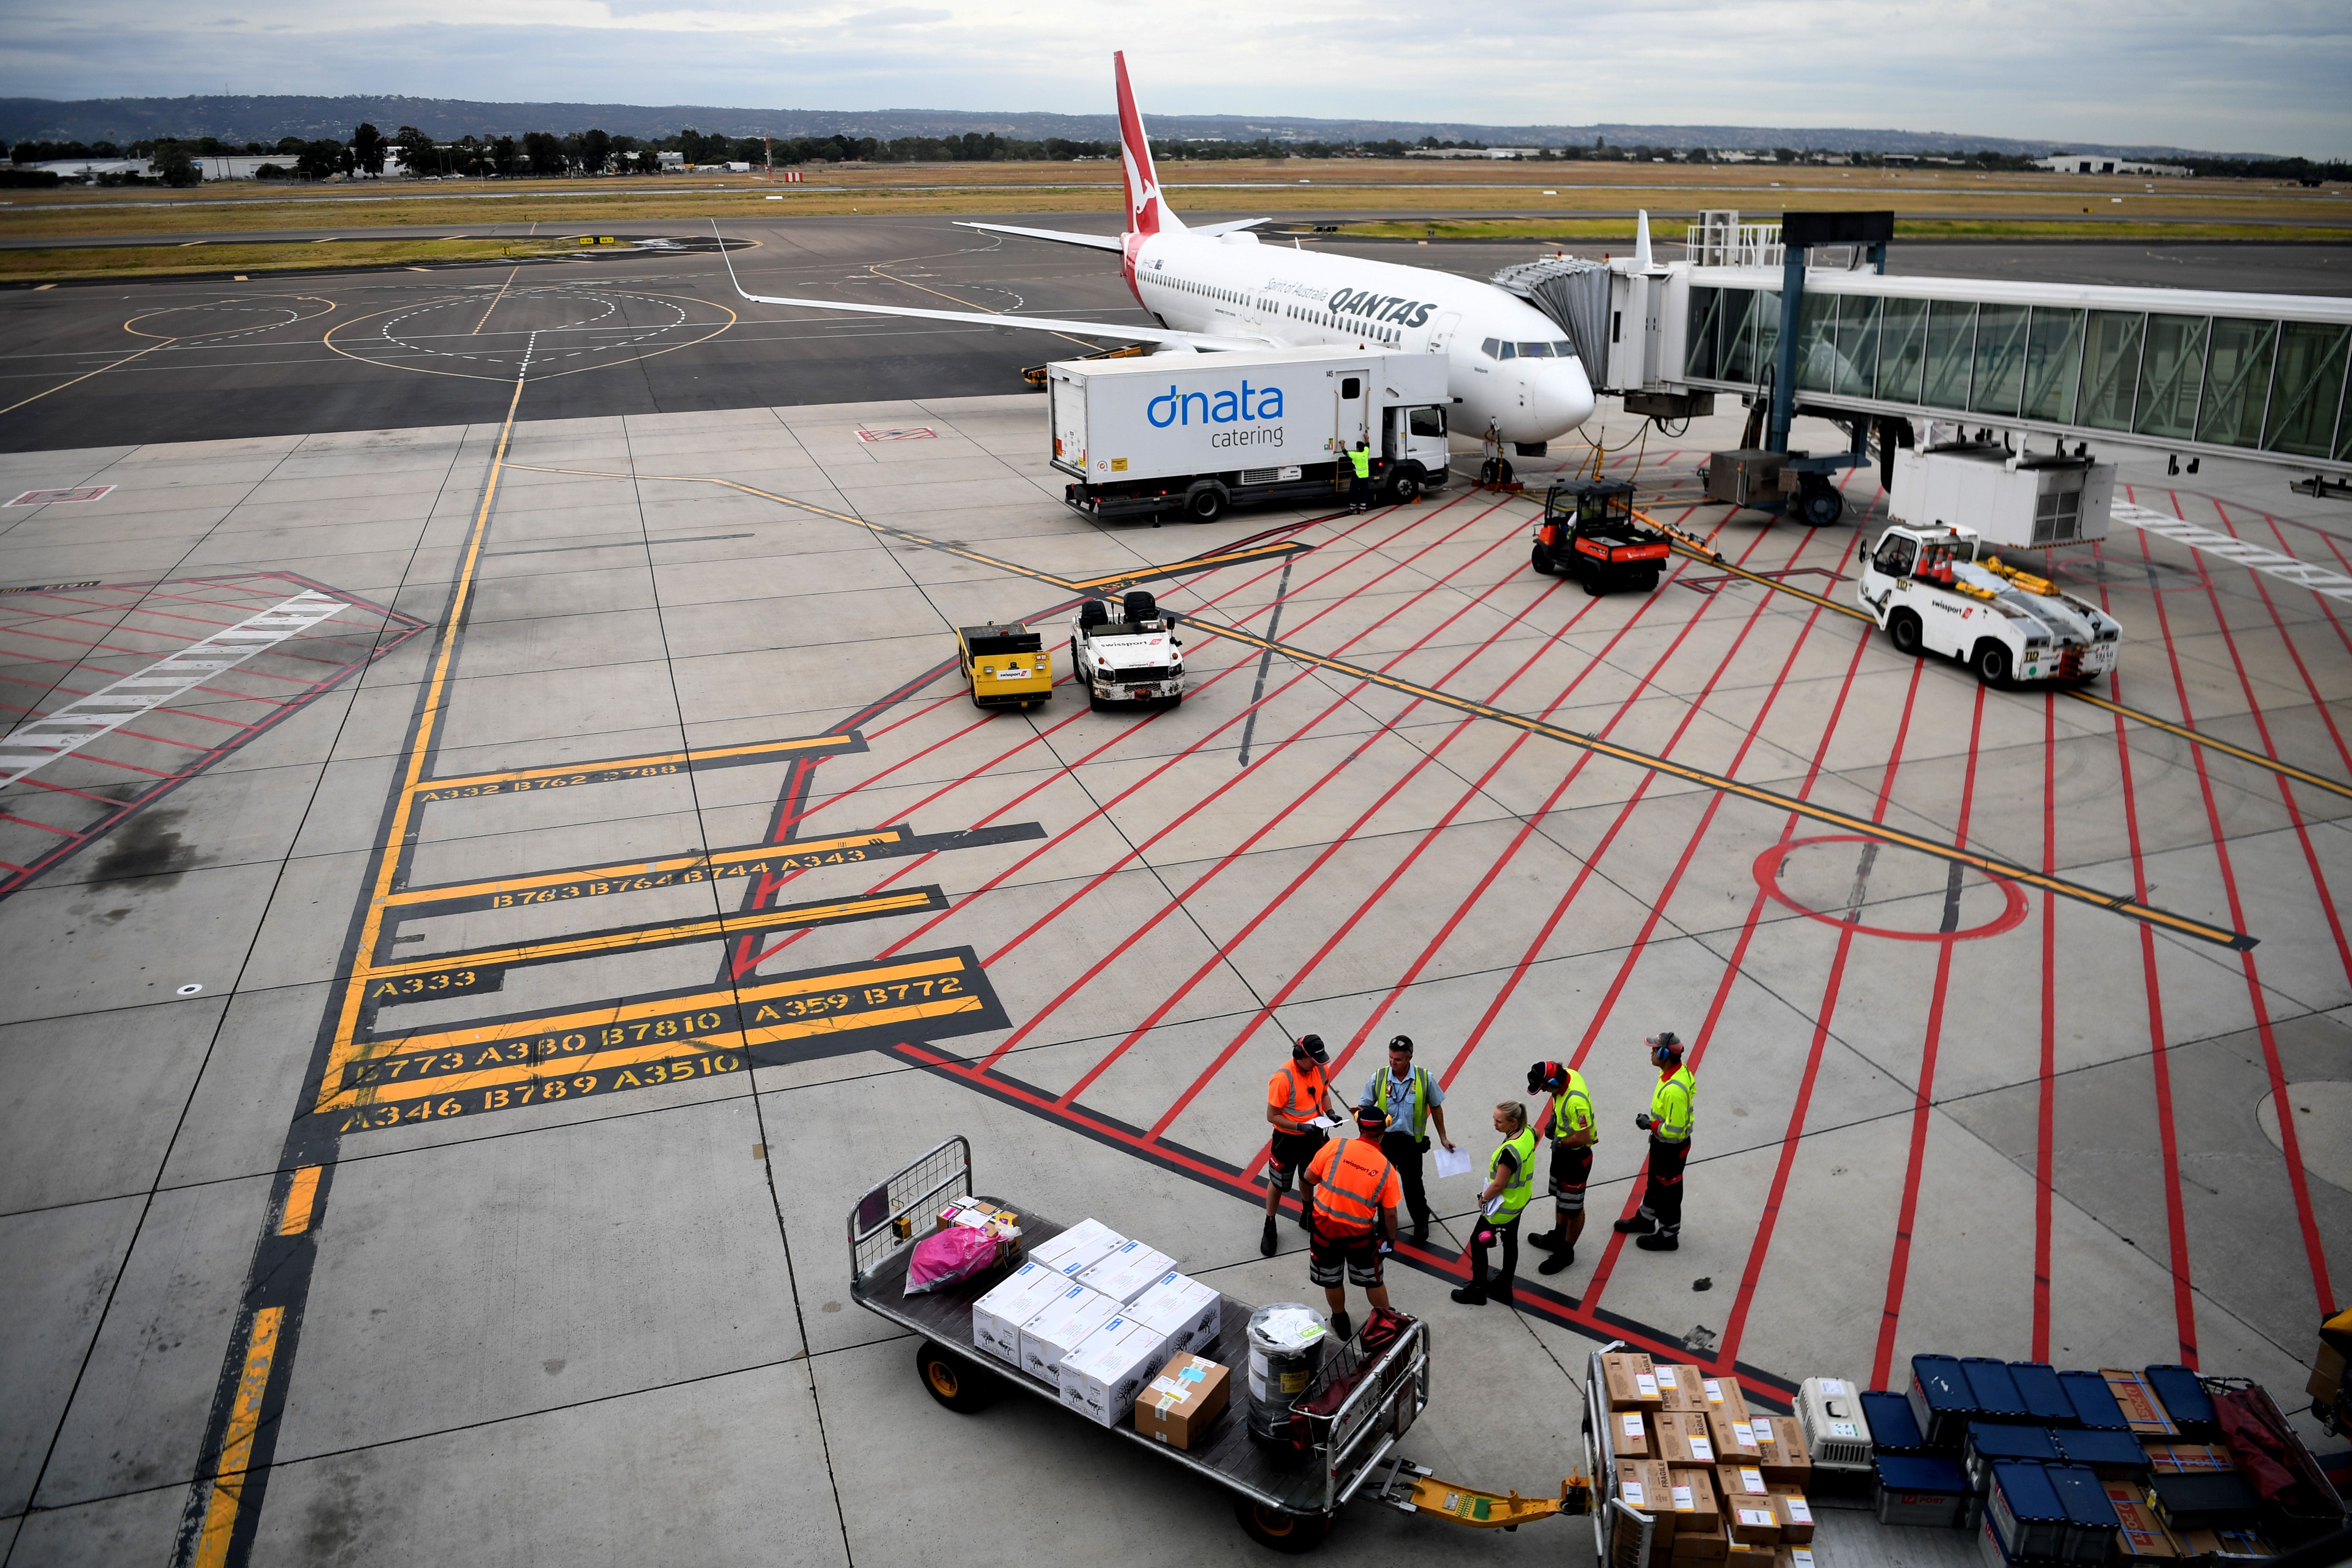 Adelaide Airport is celebrating continue growth post pandemic